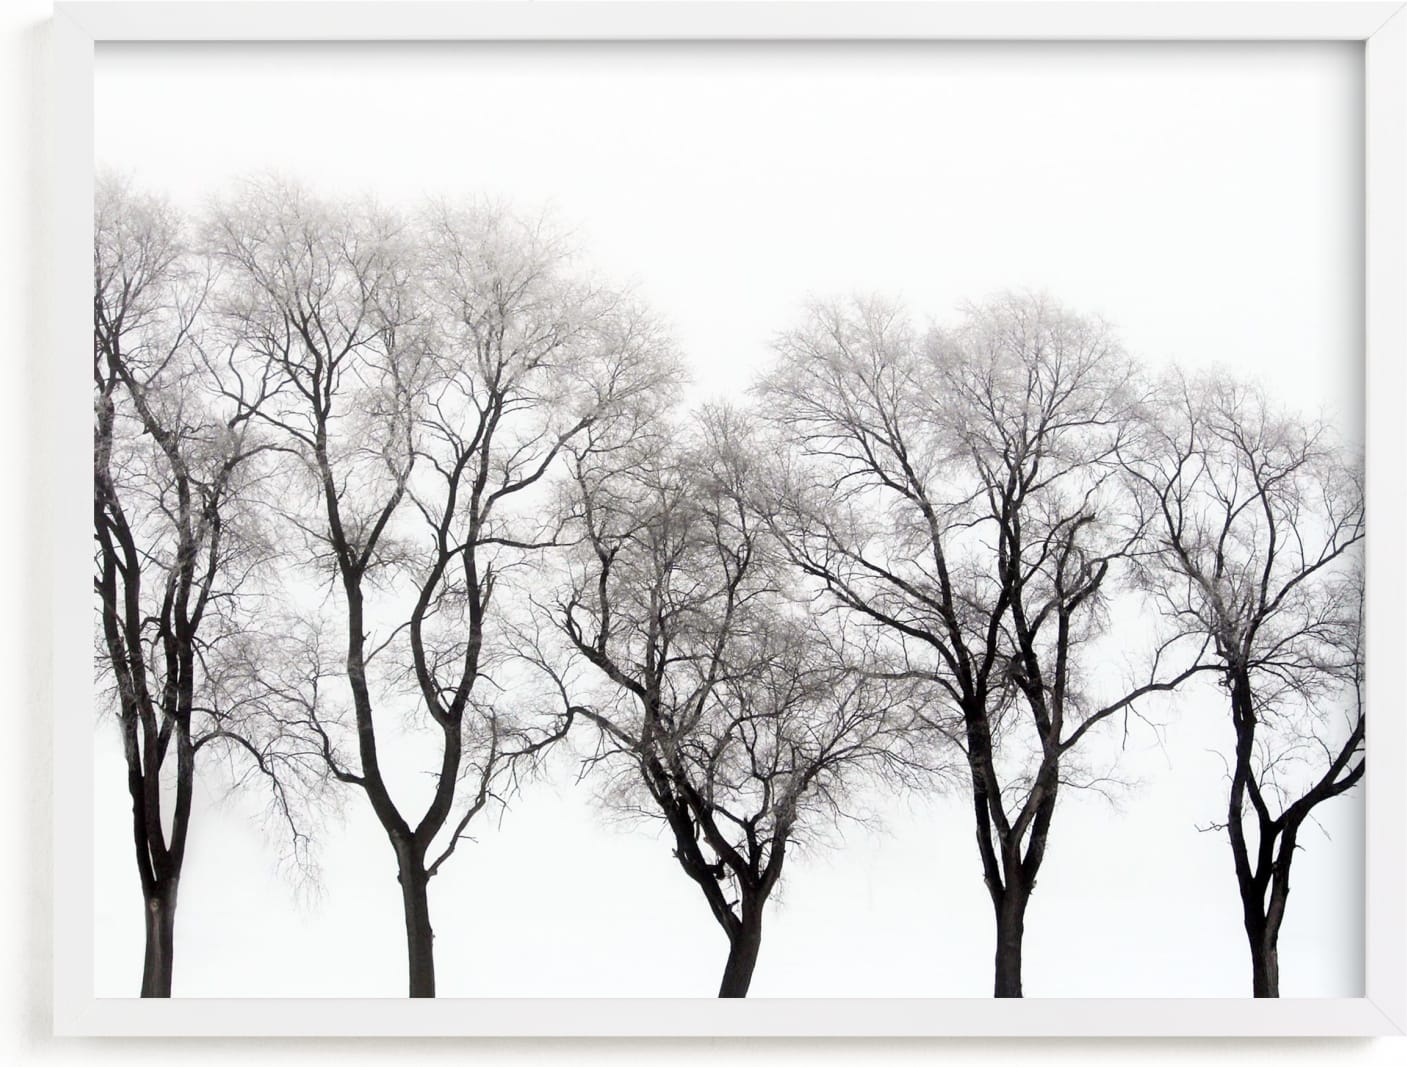 This is a black and white art by Baumbirdy called abstract trees.